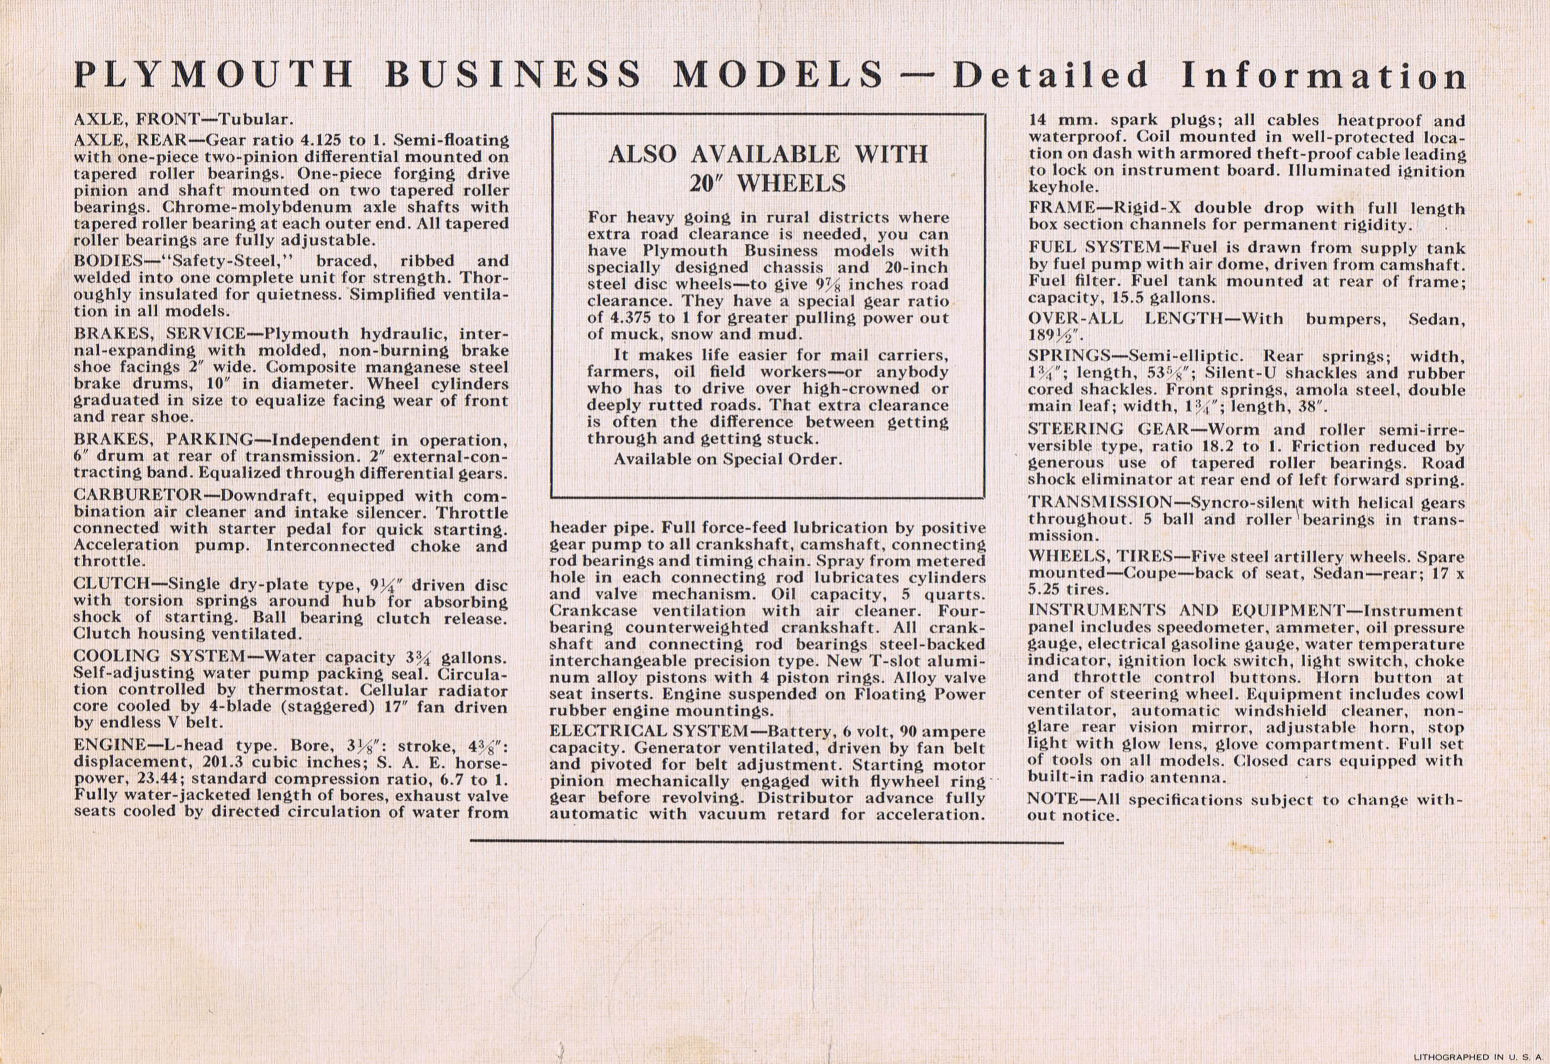 1936_Plymouth_Business_Models_Foldout-08